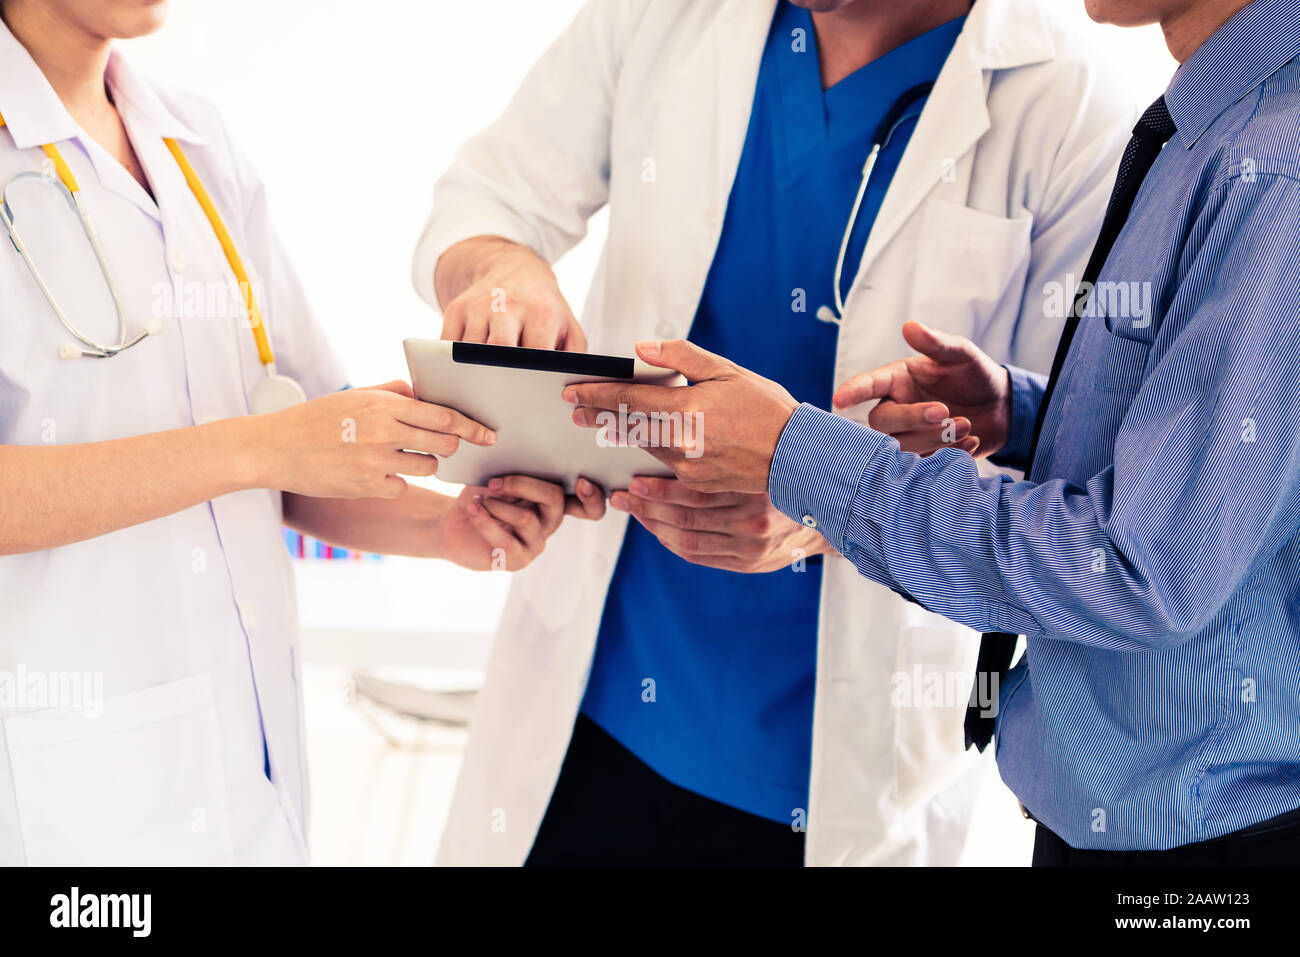 Healthcare people group and scientist meeting. Professional doctor working in hospital office with other doctors, nurse and businessman. Medical techn Stock Photo